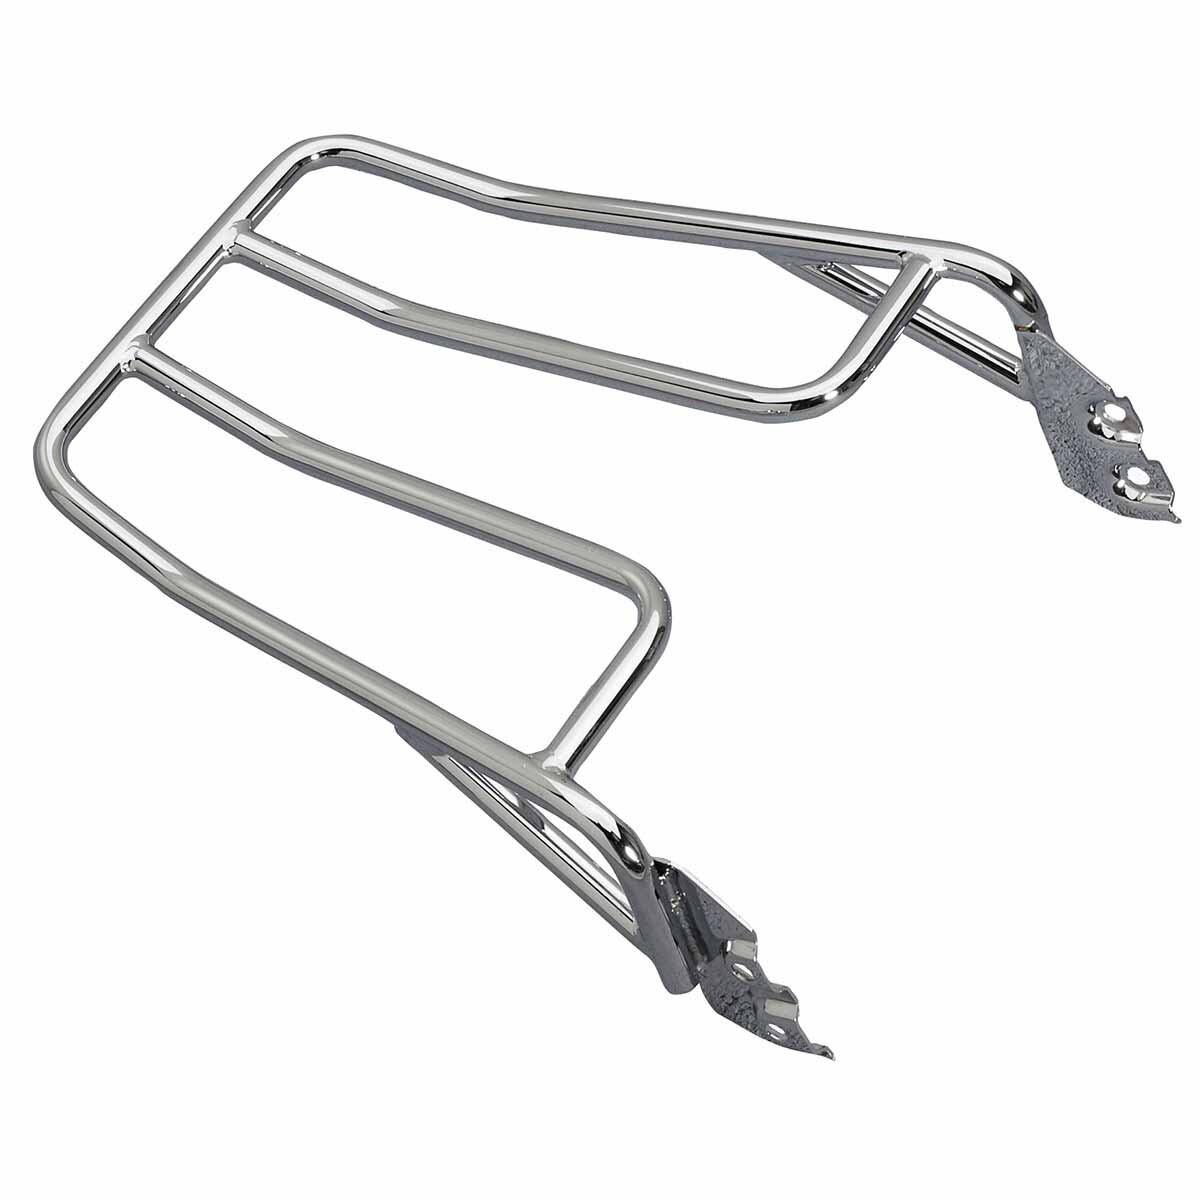 Quick Release Rear Luggage Rack